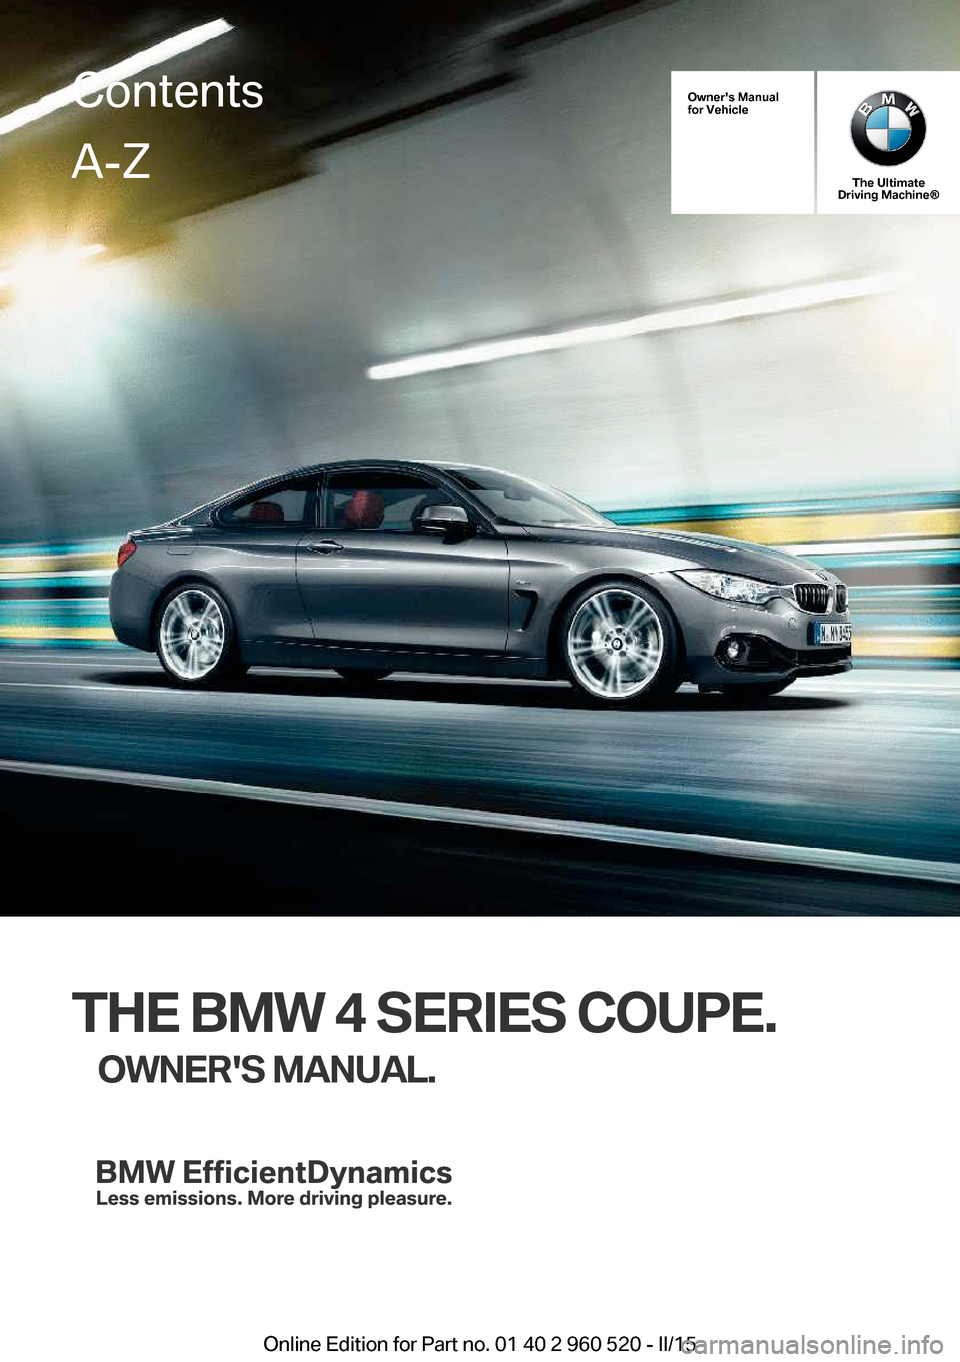 BMW 4 SERIES COUPE 2015 F32 Owners Manual Owners Manual
for Vehicle
The Ultimate
Driving Machine®
THE BMW 4 SERIES COUPE.
OWNERS MANUAL.
ContentsA-Z
Online Edition for Part no. 01 40 2 960 520 - II/15   